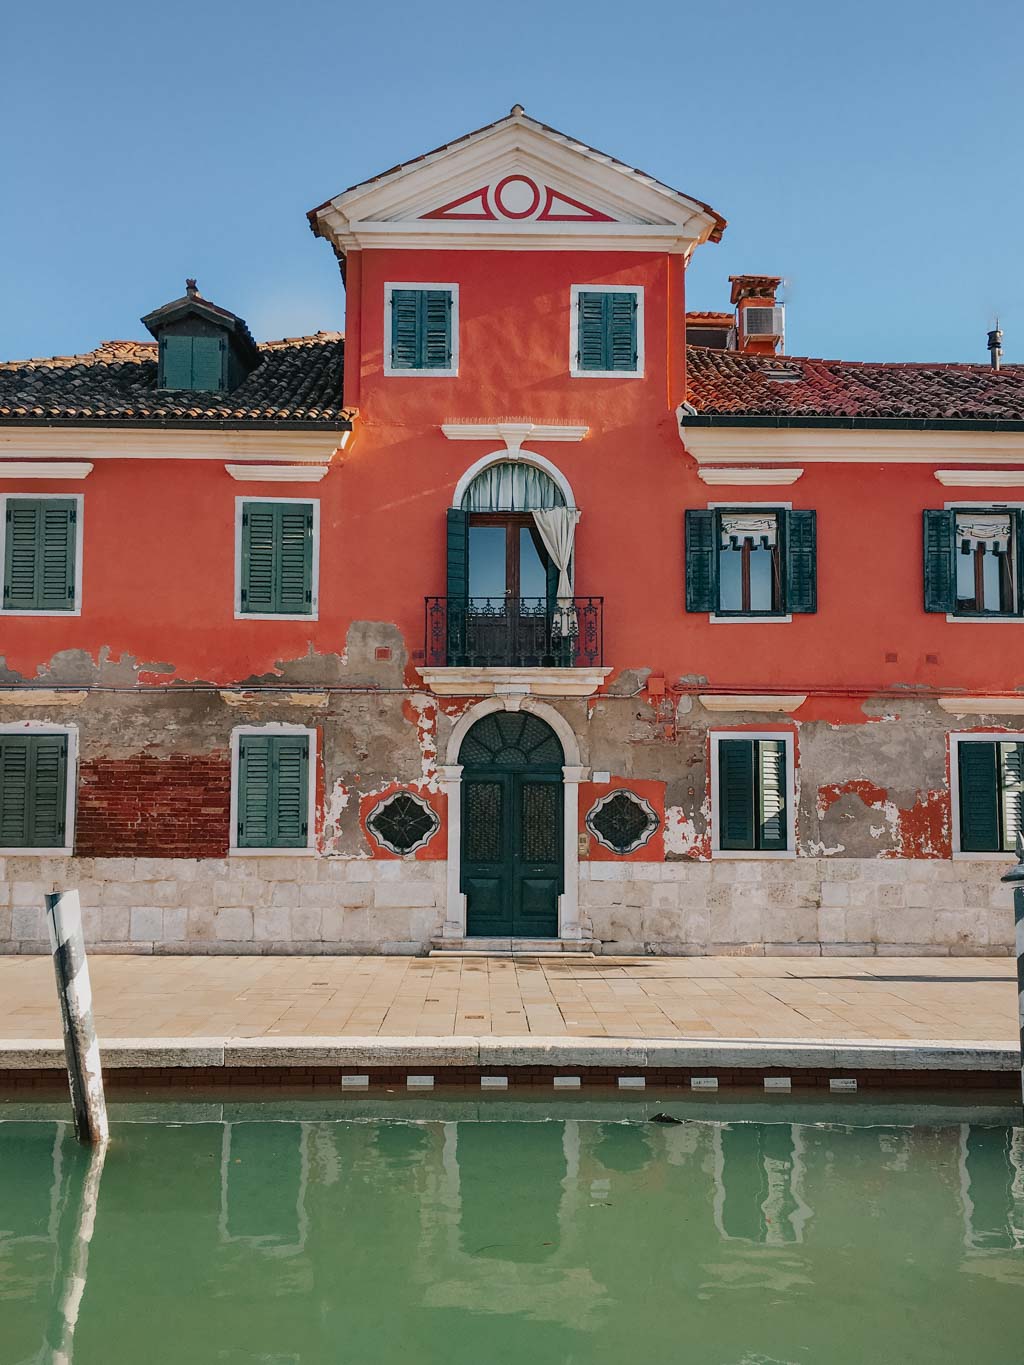 Venice 2 day itinerary will take you to Burano Island with bright red buildings with green window shutters along a water canal on a bright blue sunny day